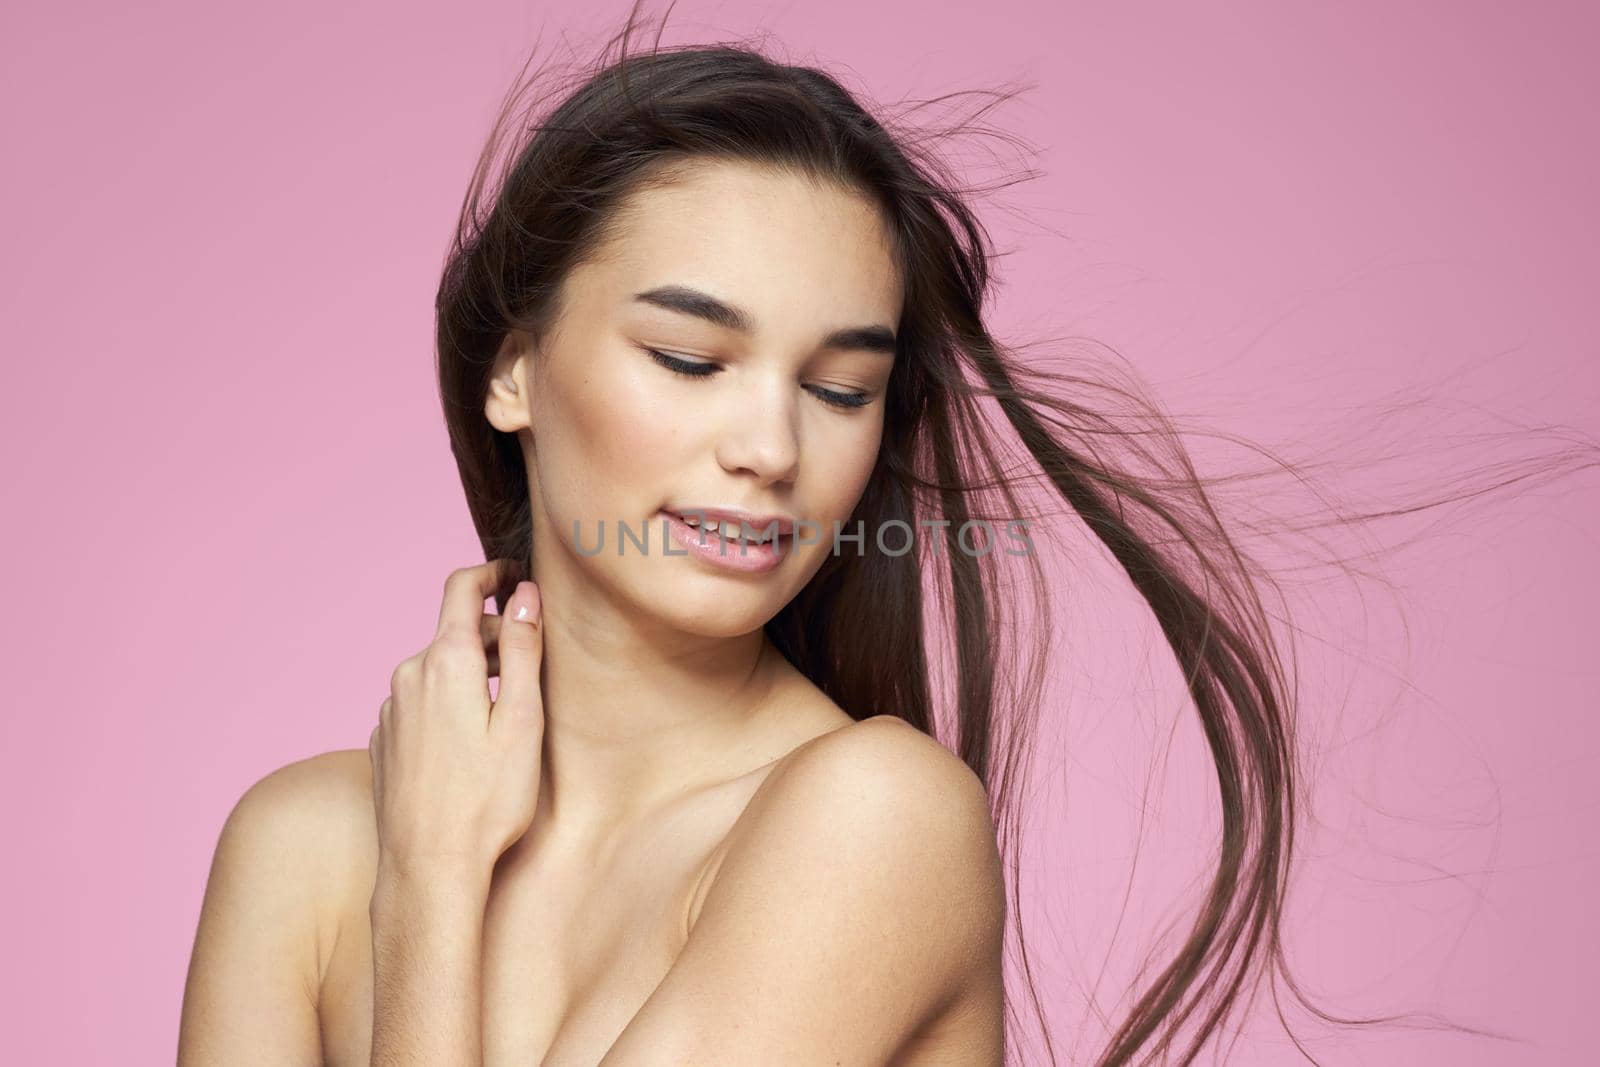 Pretty brunette naked shoulders clear skin pink background. High quality photo